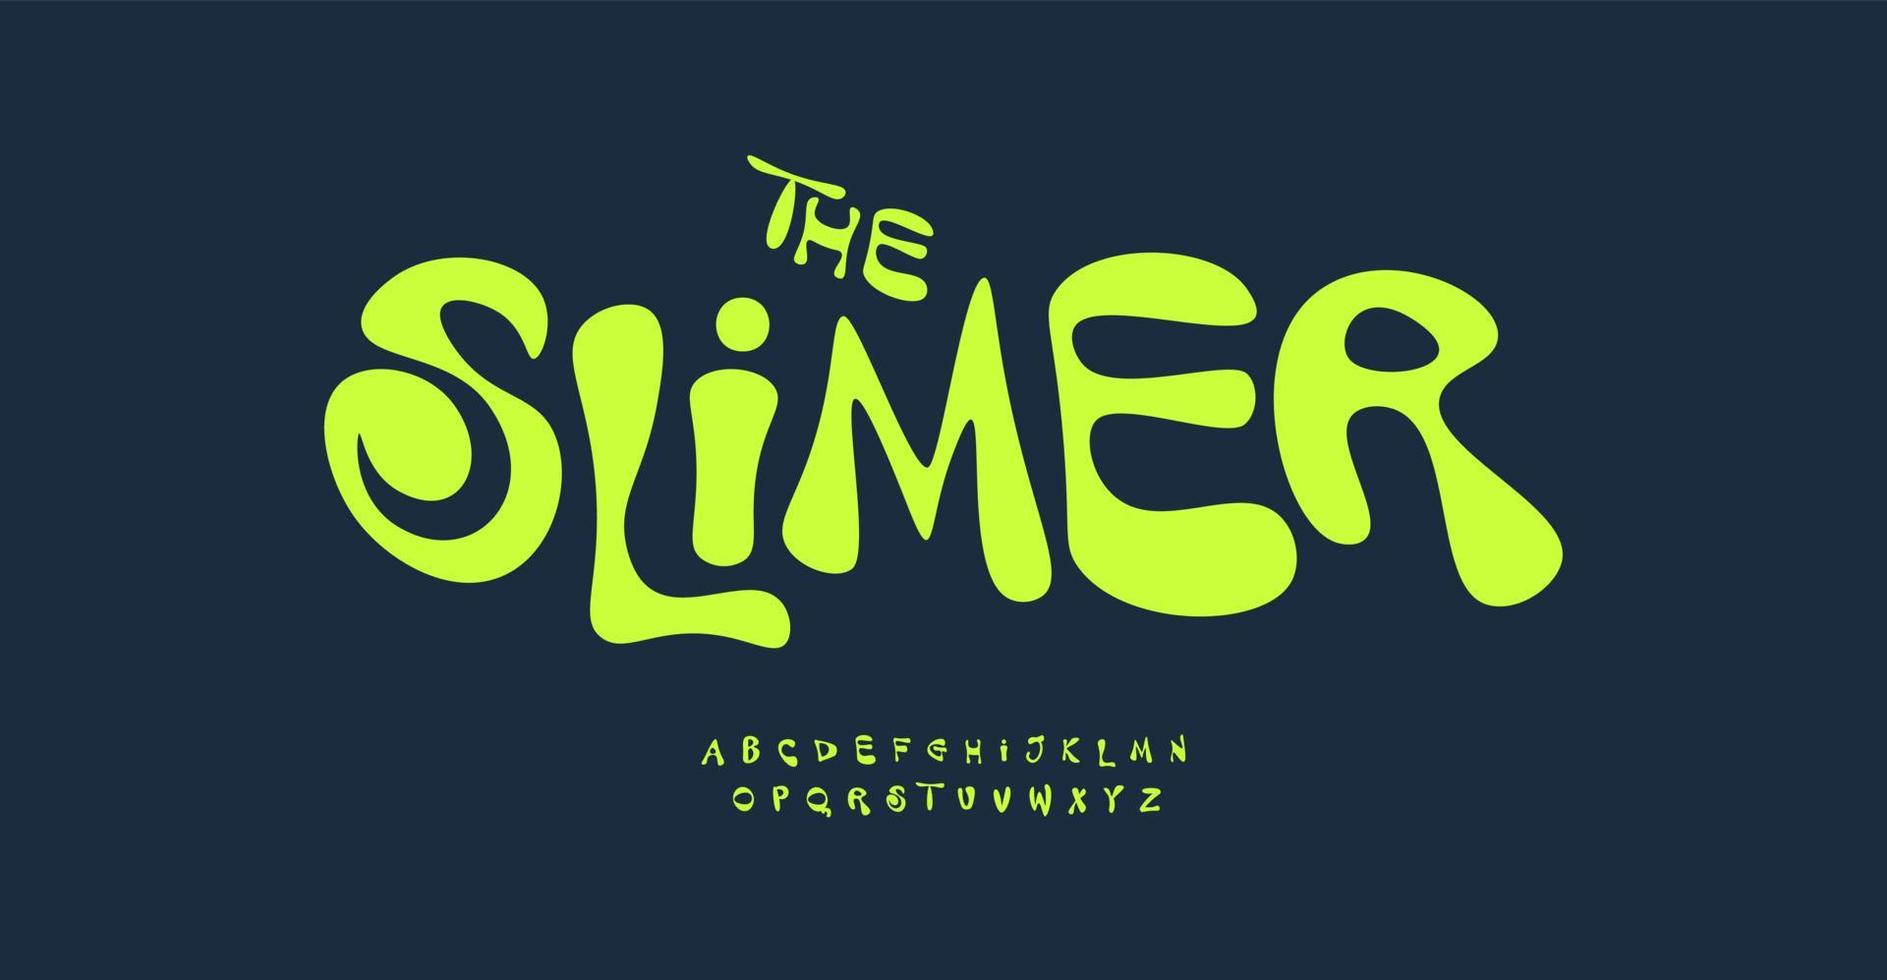 Slimy font, lime color cartoon letters. Cartoon blots alphabet for slime, plasticine, spots art, childish game headline and logo. Playful bright green bubbles letters, vector typographic design.